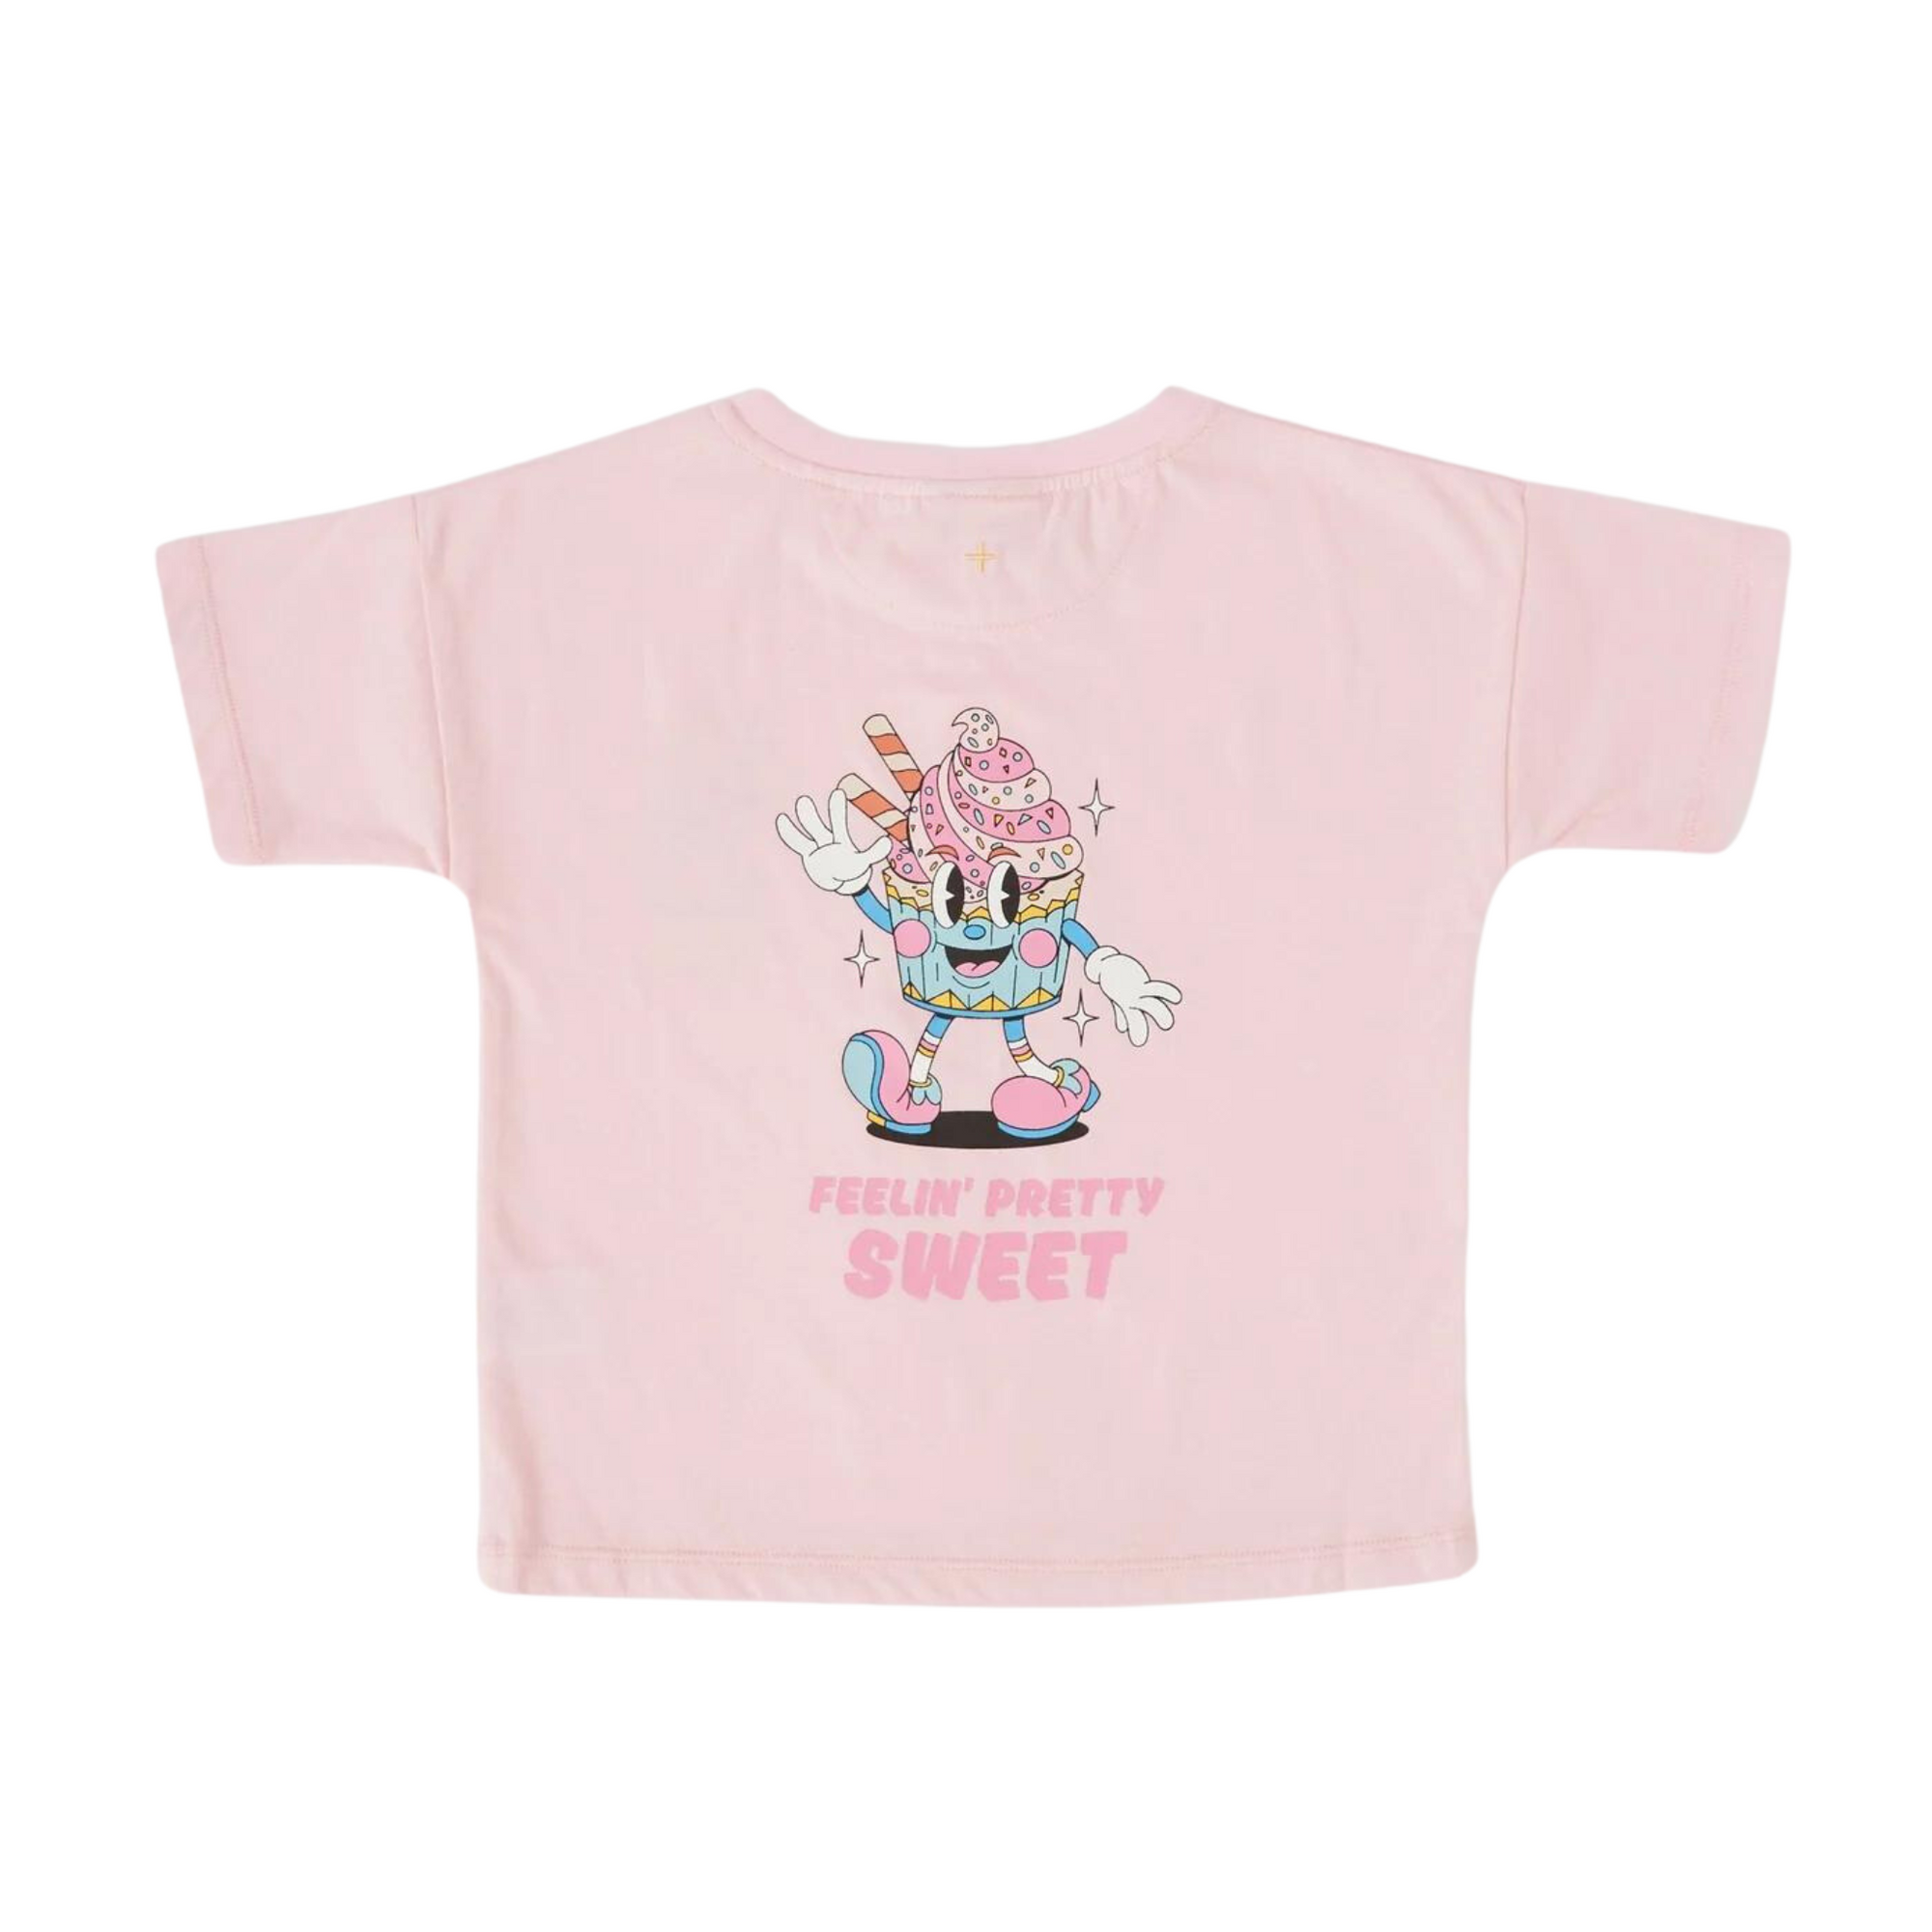 Goldie and Ace Feelin' Pretty Sweet Tshirt - Pink